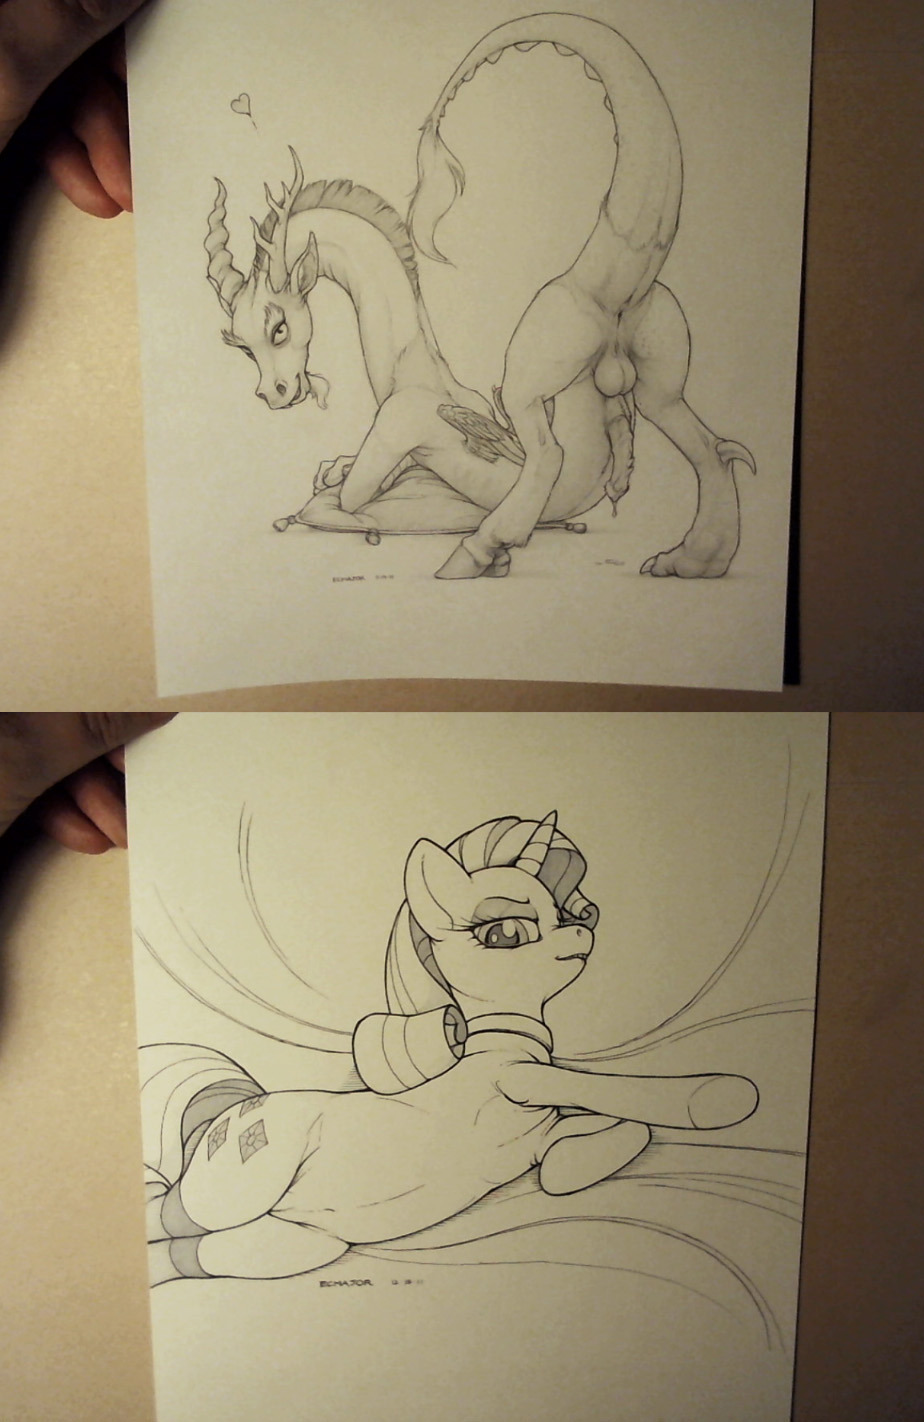 Selling a few original pony pieces i’ve had laying around!Discord (graphite, 8.5x11